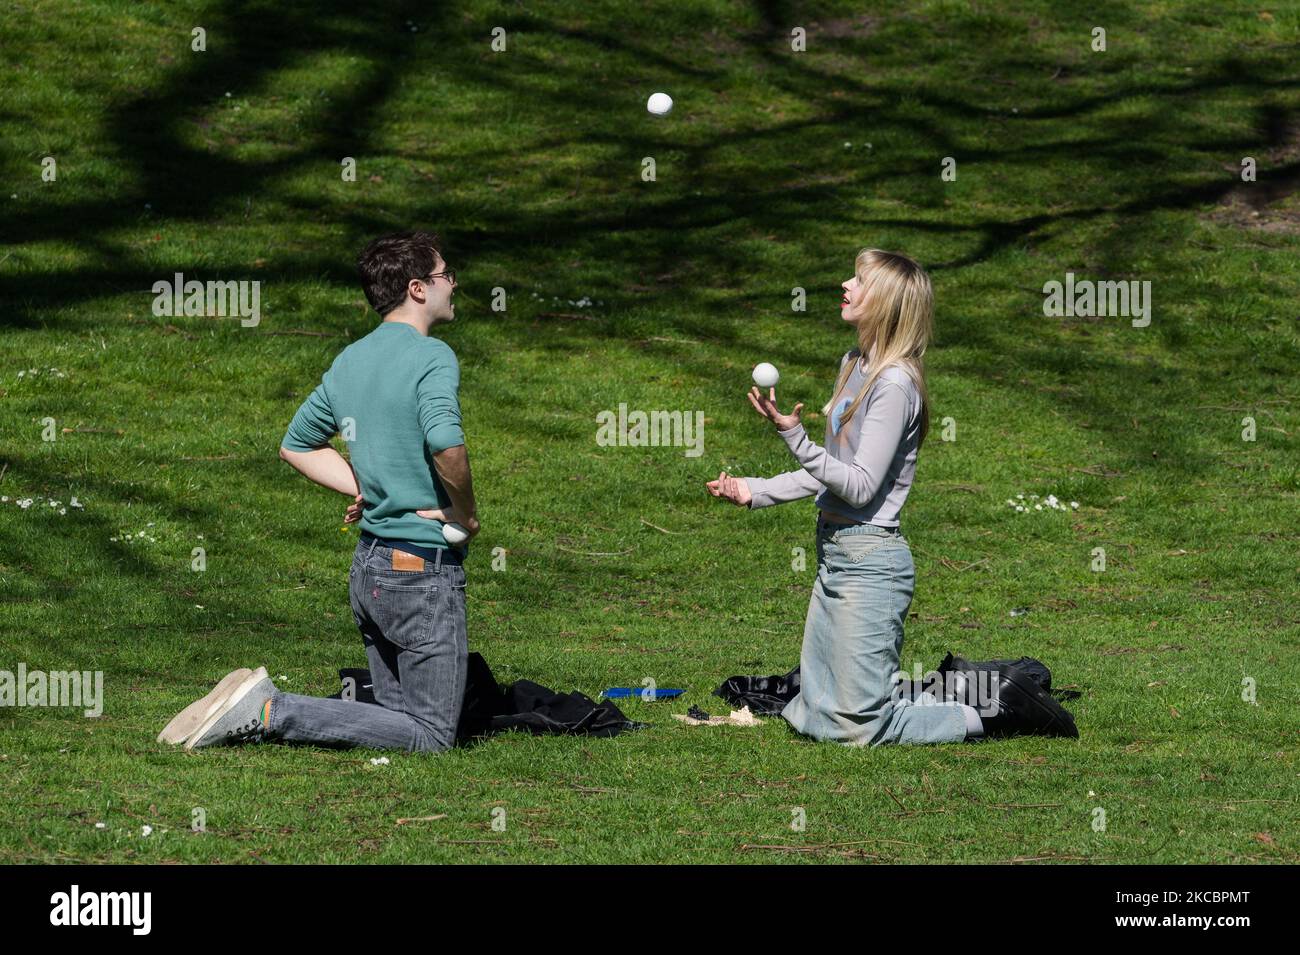 LONDON, UNITED KINGDOM - MARCH 29, 2021: A woman juggles in St James's Park as Coronavirus lockdown restrictions are eased across England, on 29 March, 2021 in London, England. From today six people or two households are allowed to meet outside while observing social distancing, the 'stay at home' order is lifted and outdoor sports facilities can re-open. (Photo by WIktor Szymanowicz/NurPhoto) Stock Photo